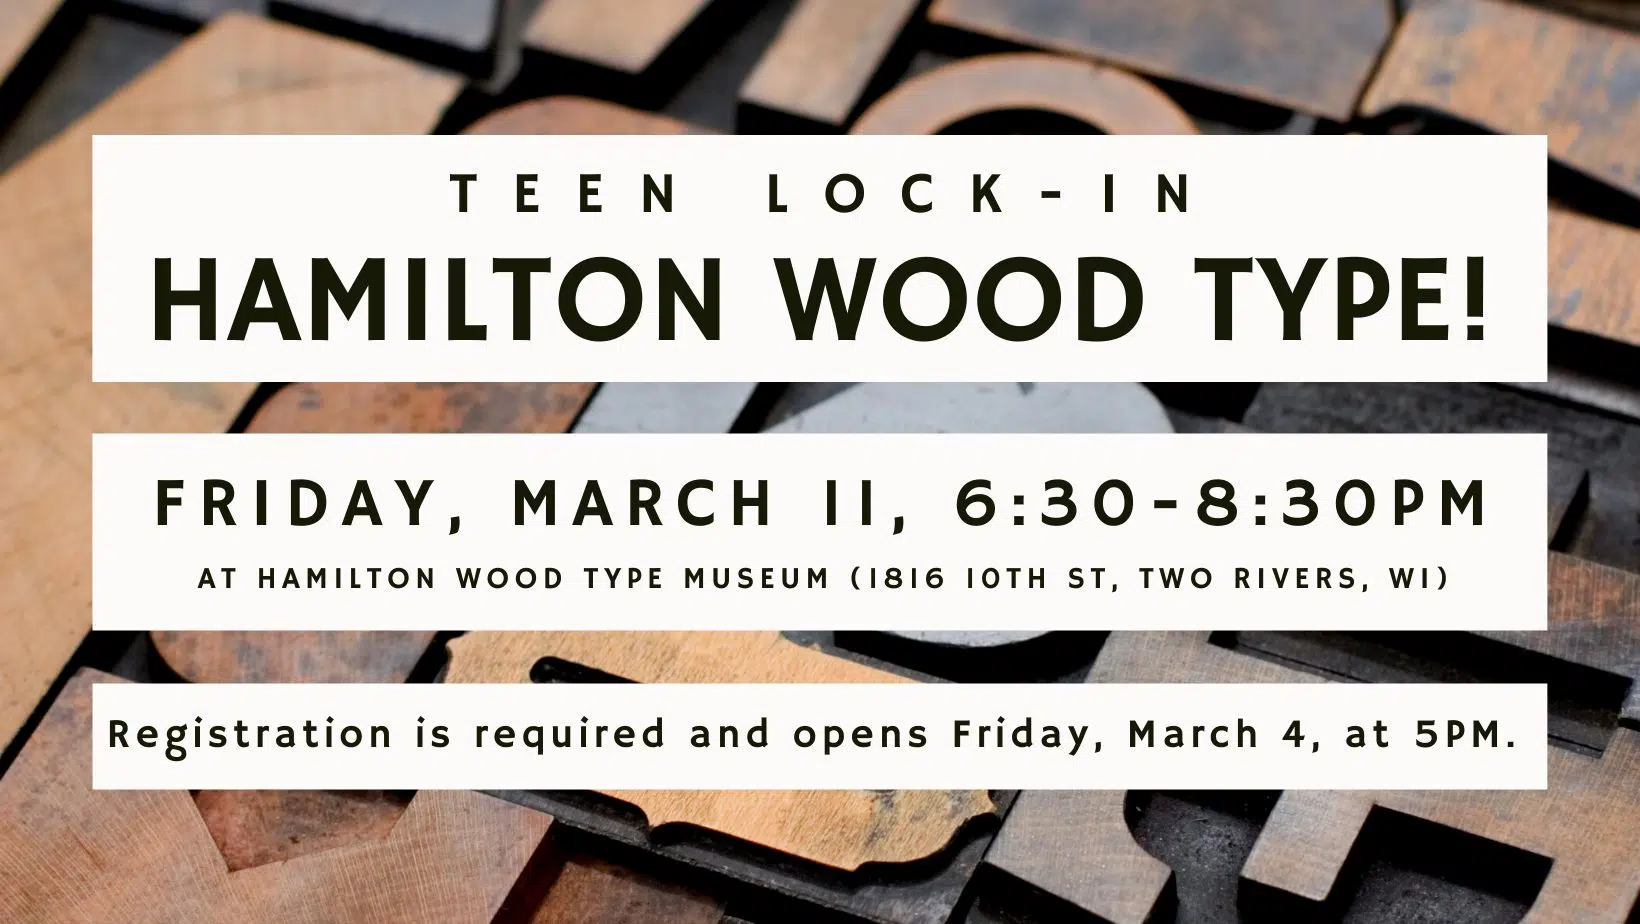 Manitowoc Public Library and Hamilton Wood Type Museum Team Up for Teen Lock-In